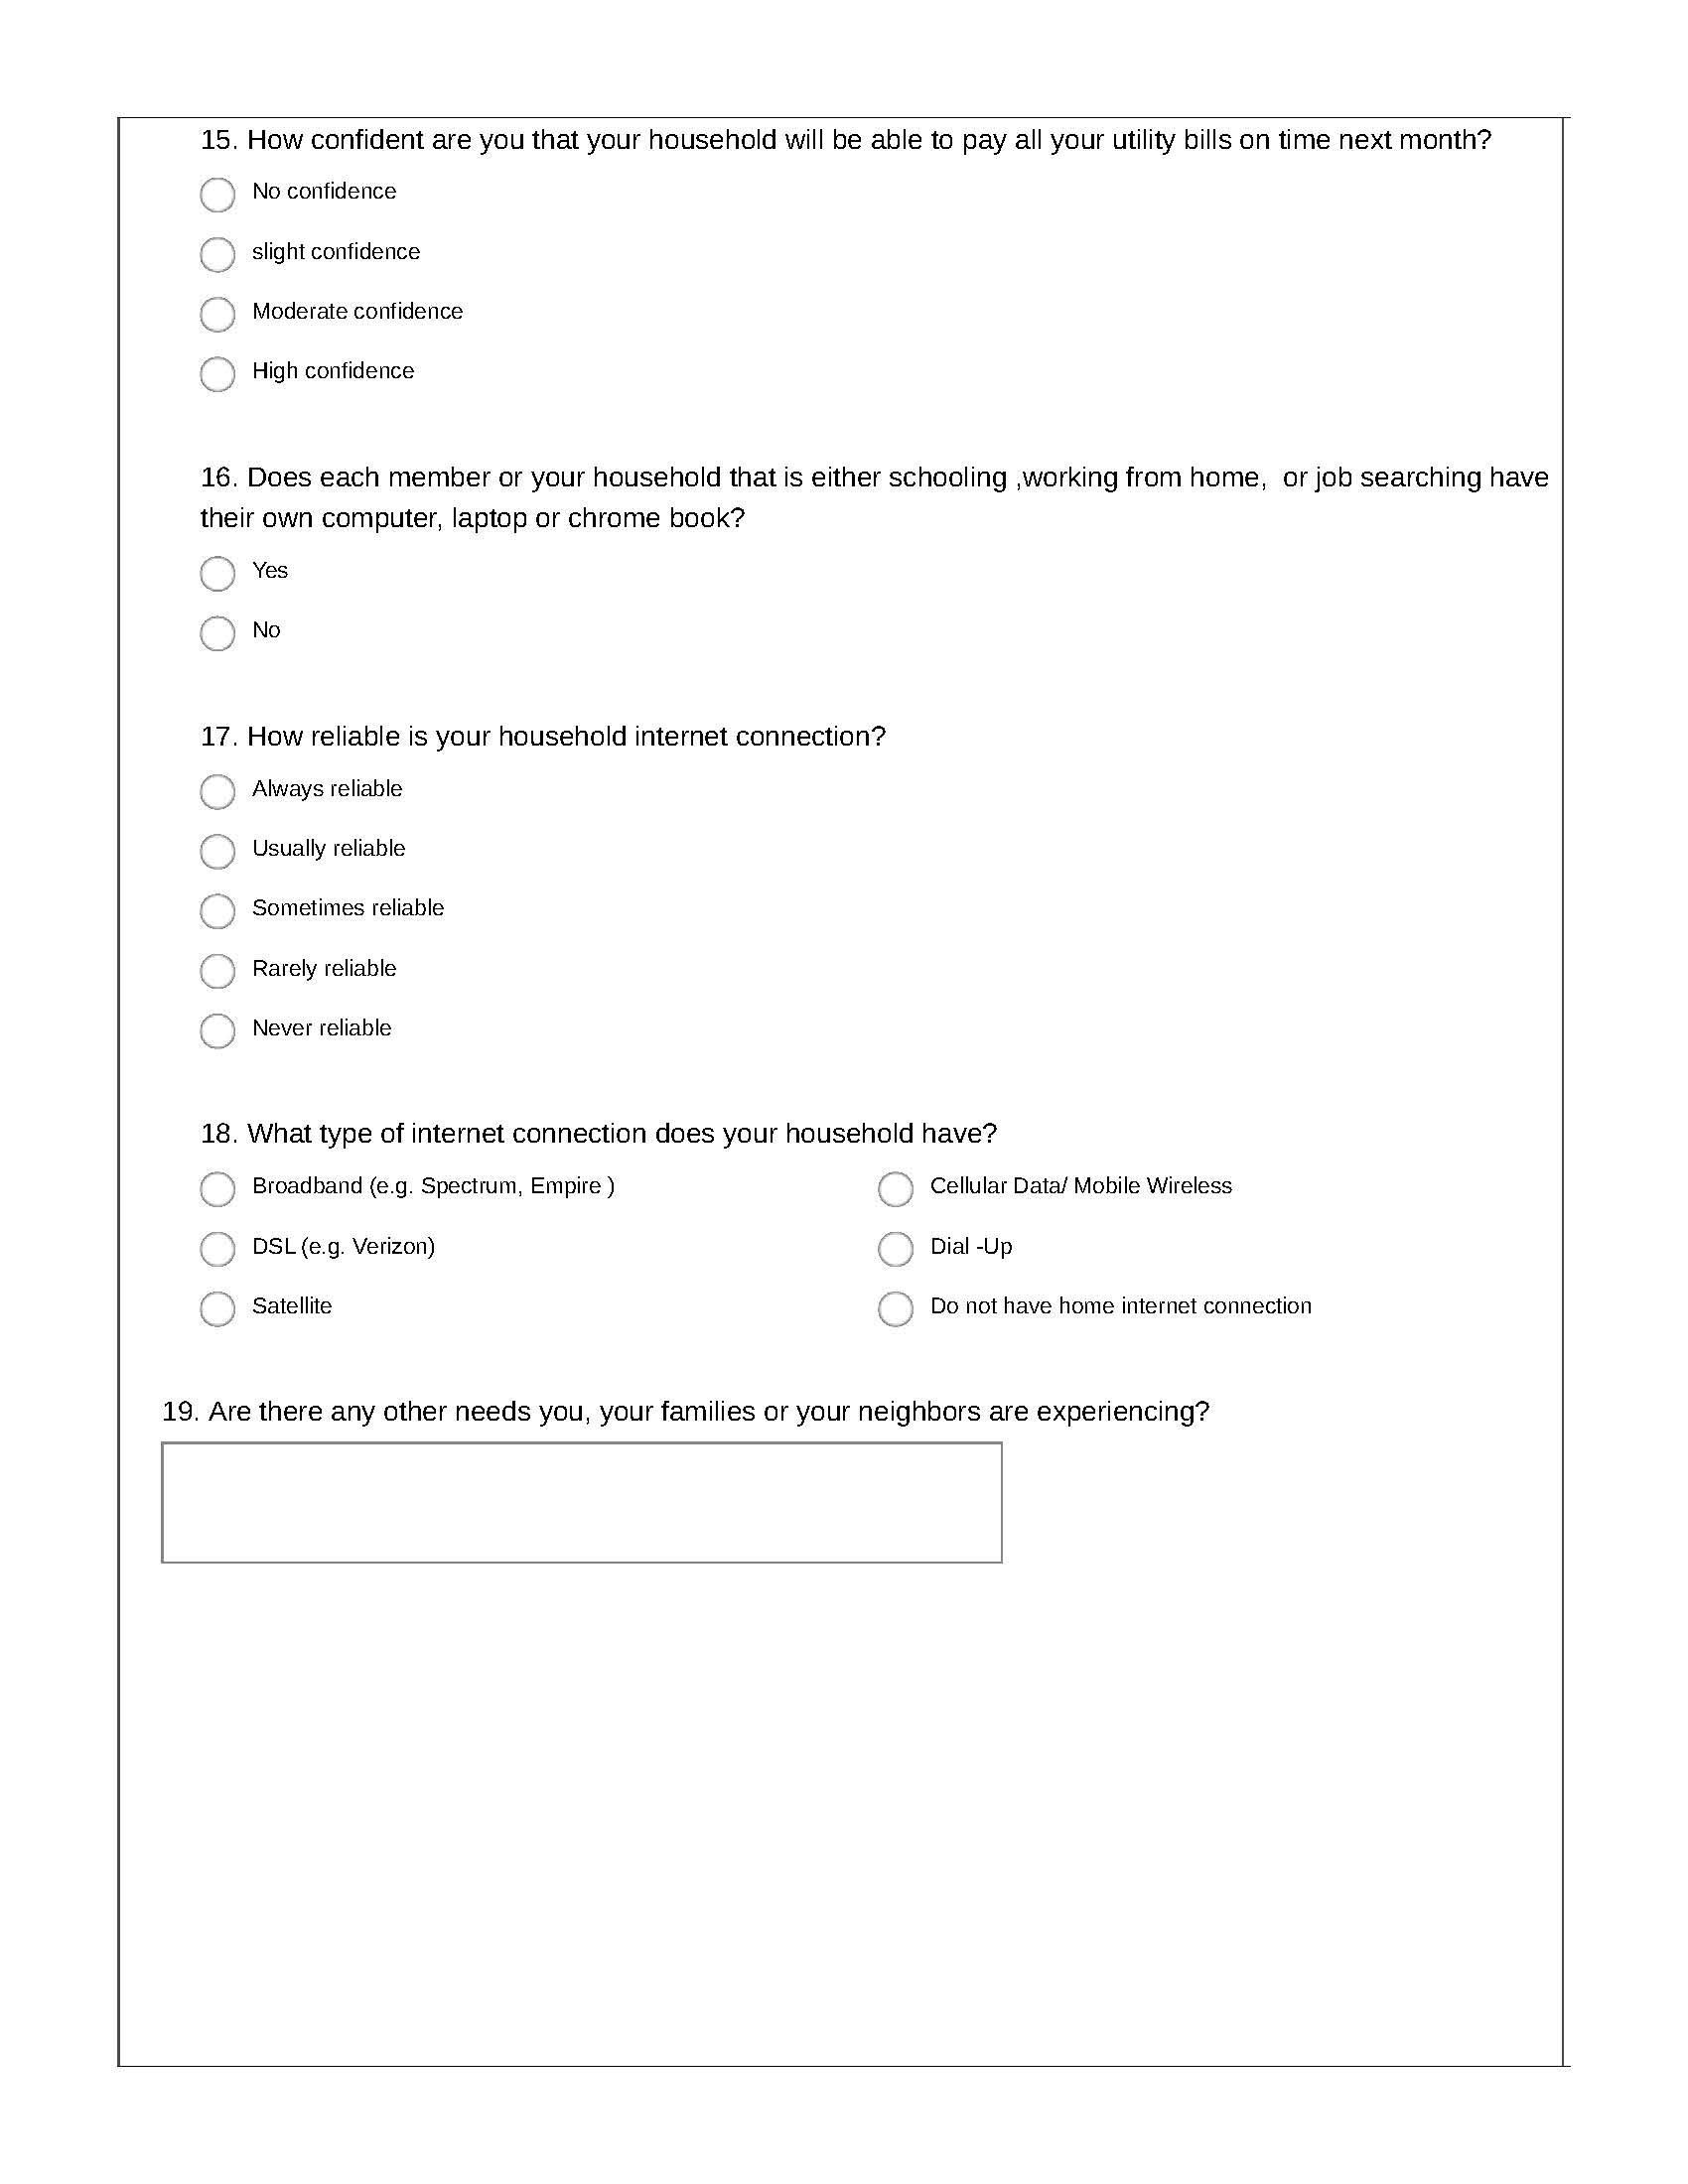 COVID 19 Community Needs Assessment Page 4 - ProAction Community Needs Assessment